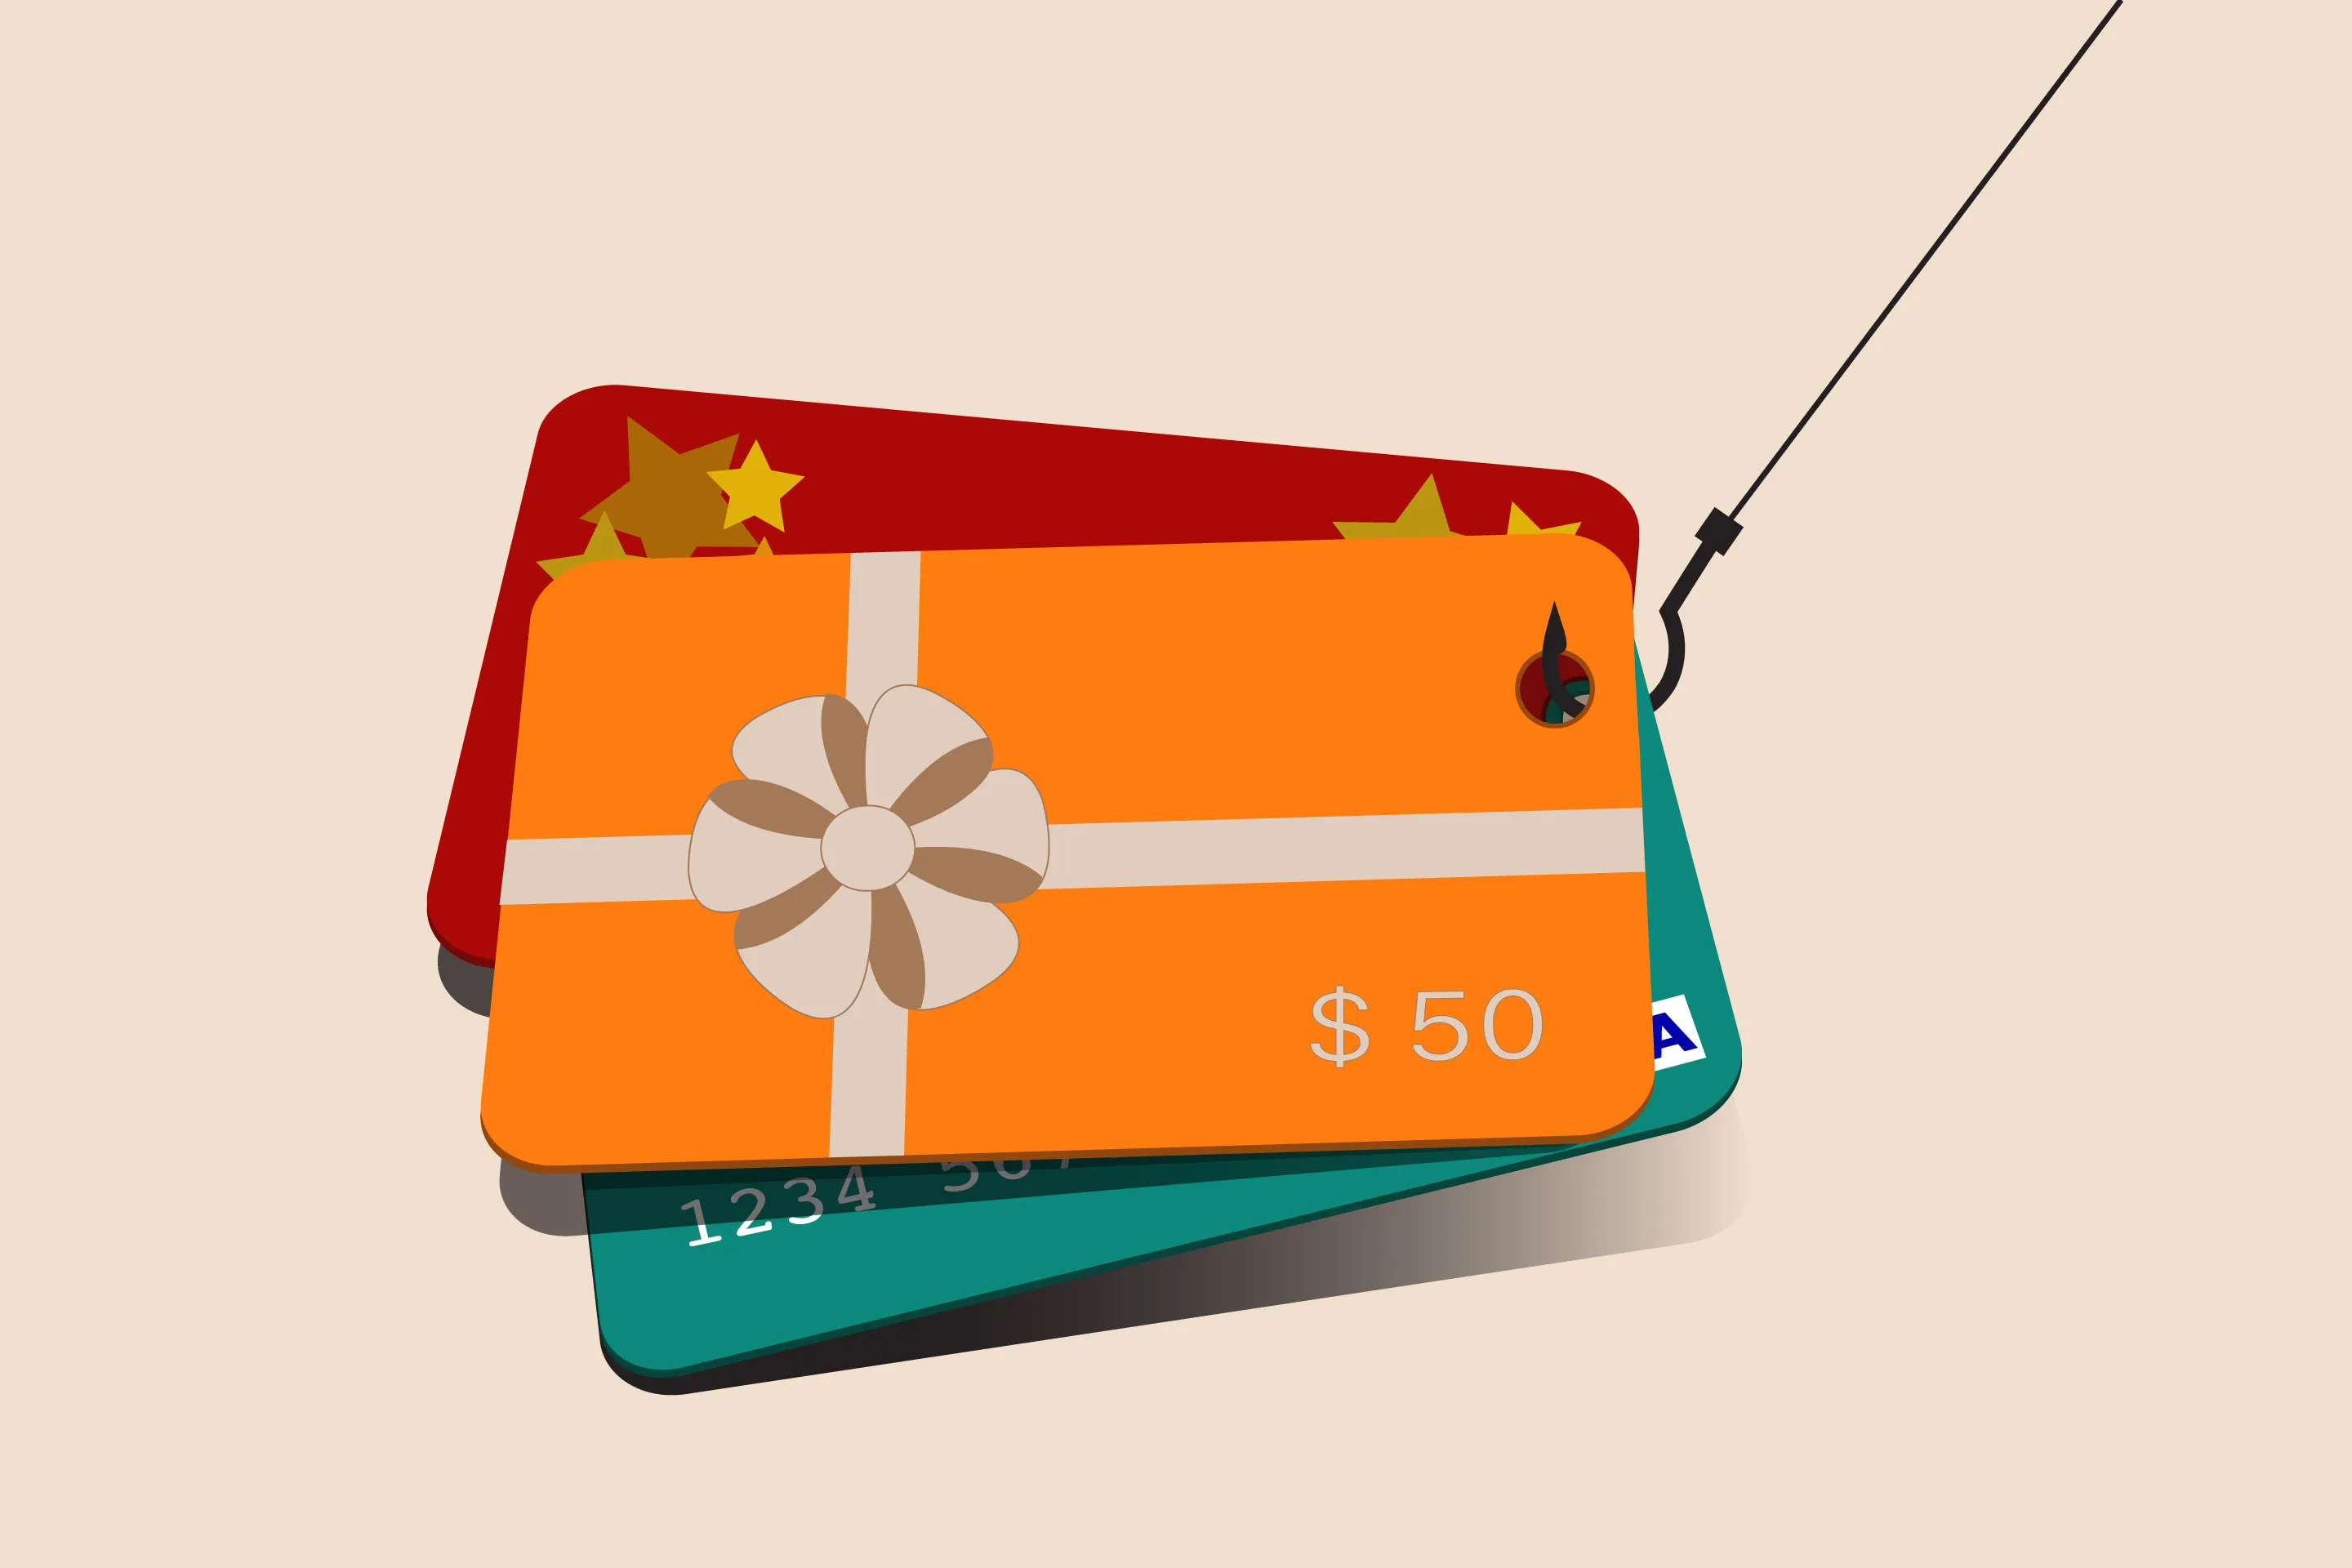 Gift Card Scams: Stay Safe, Never Pay Via Gift Cards